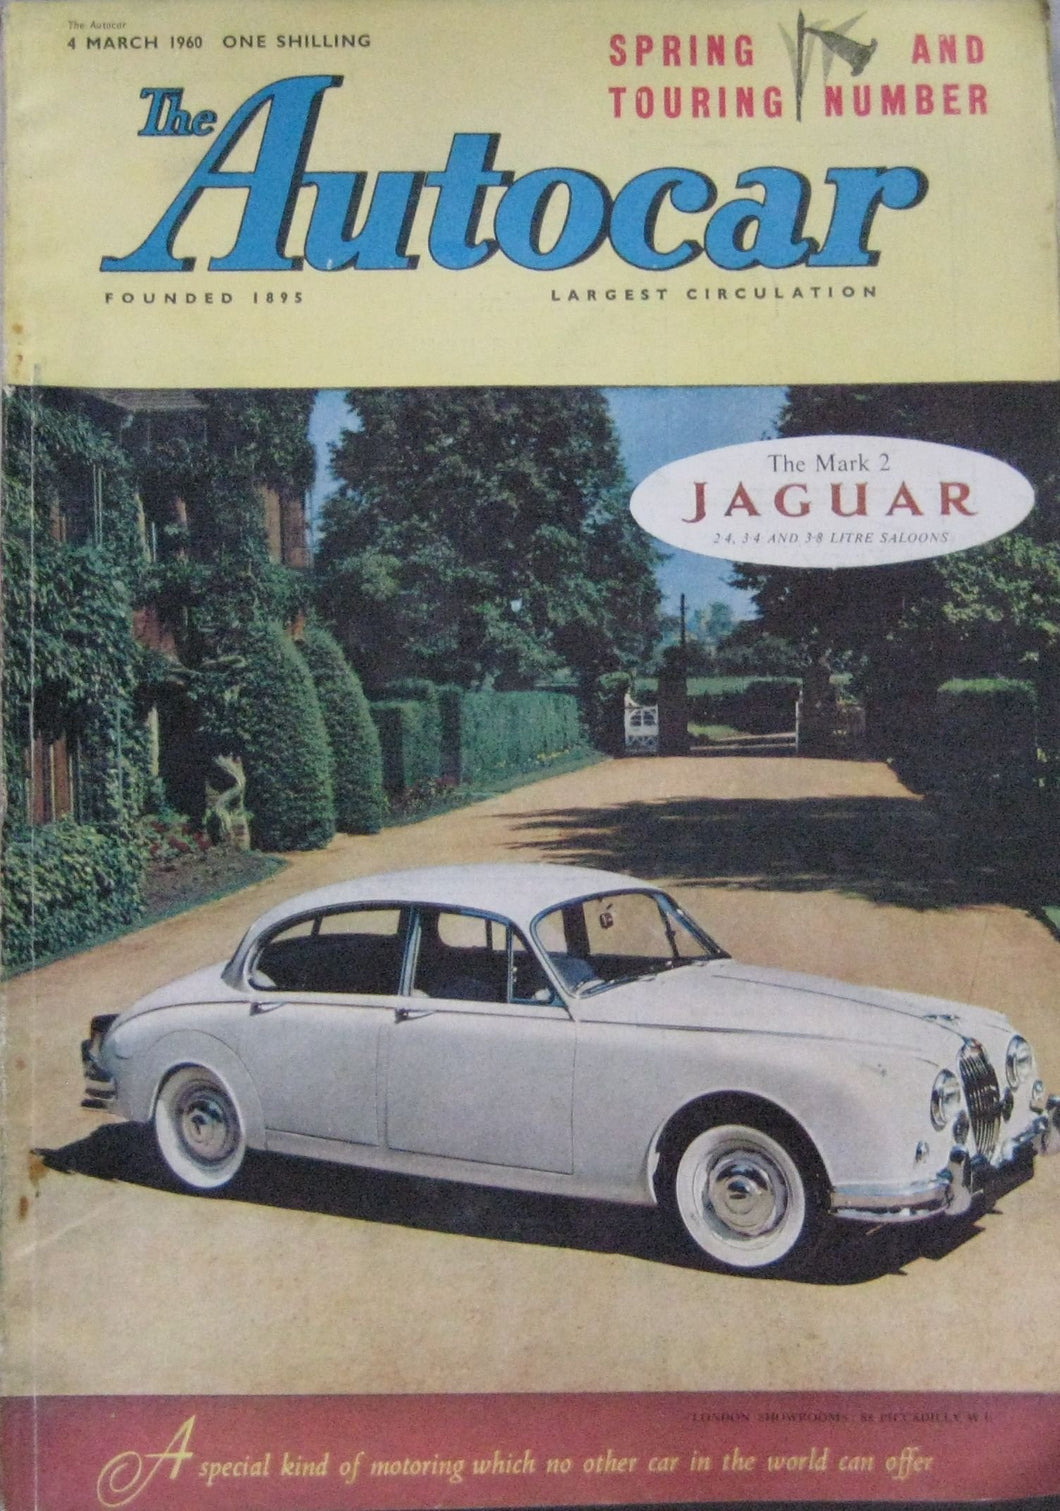 Autocar magazine 4/3/1960 featuring Riley Four Sixty-Eight road test